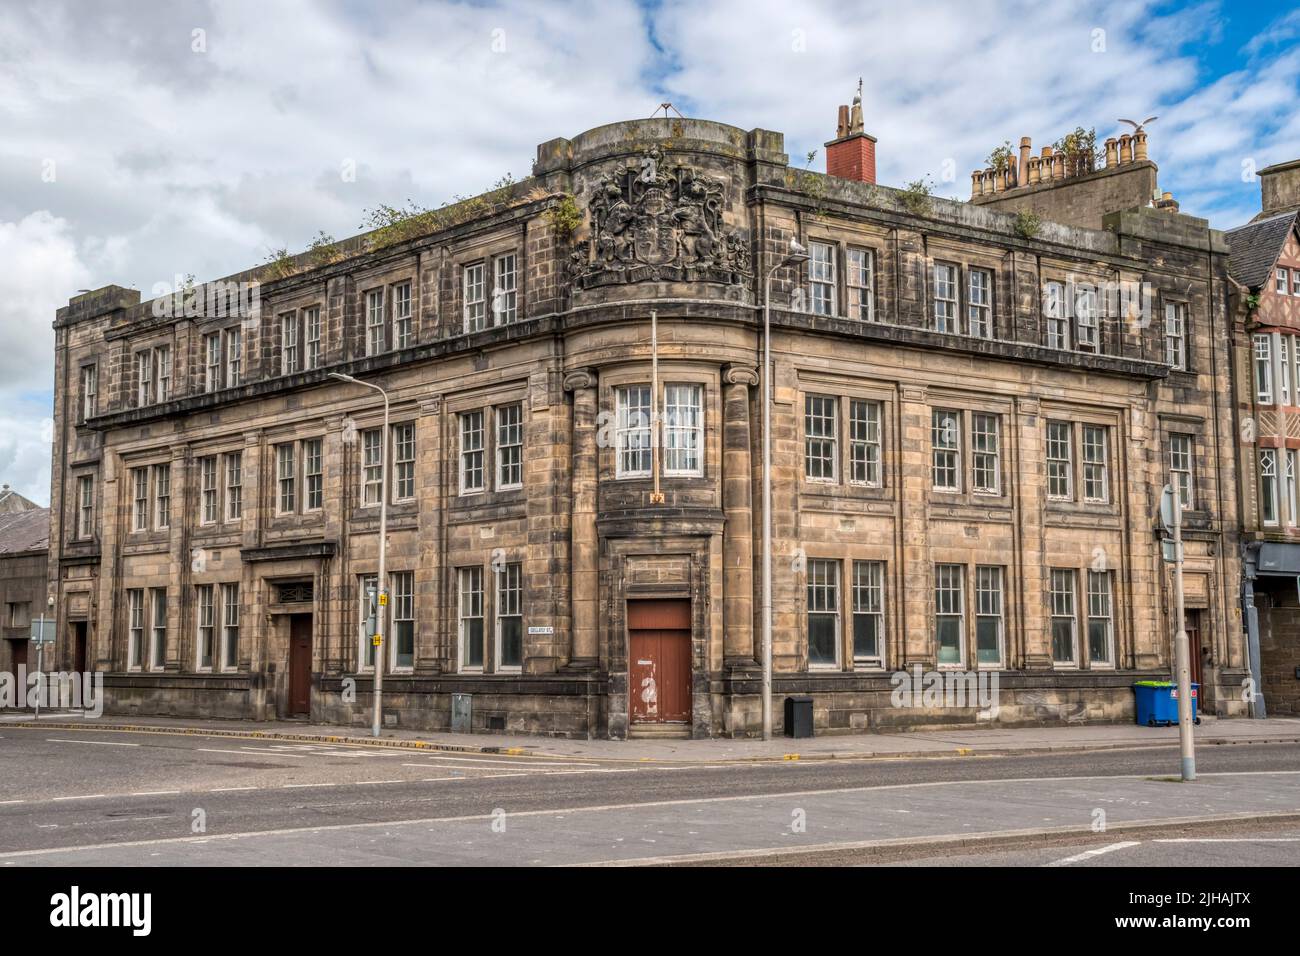 The early 20th century Grade B listed former Department for Work and Pensions JobCentre building in Dundee on corner of Dock Street & Gellatly Street. Stock Photo